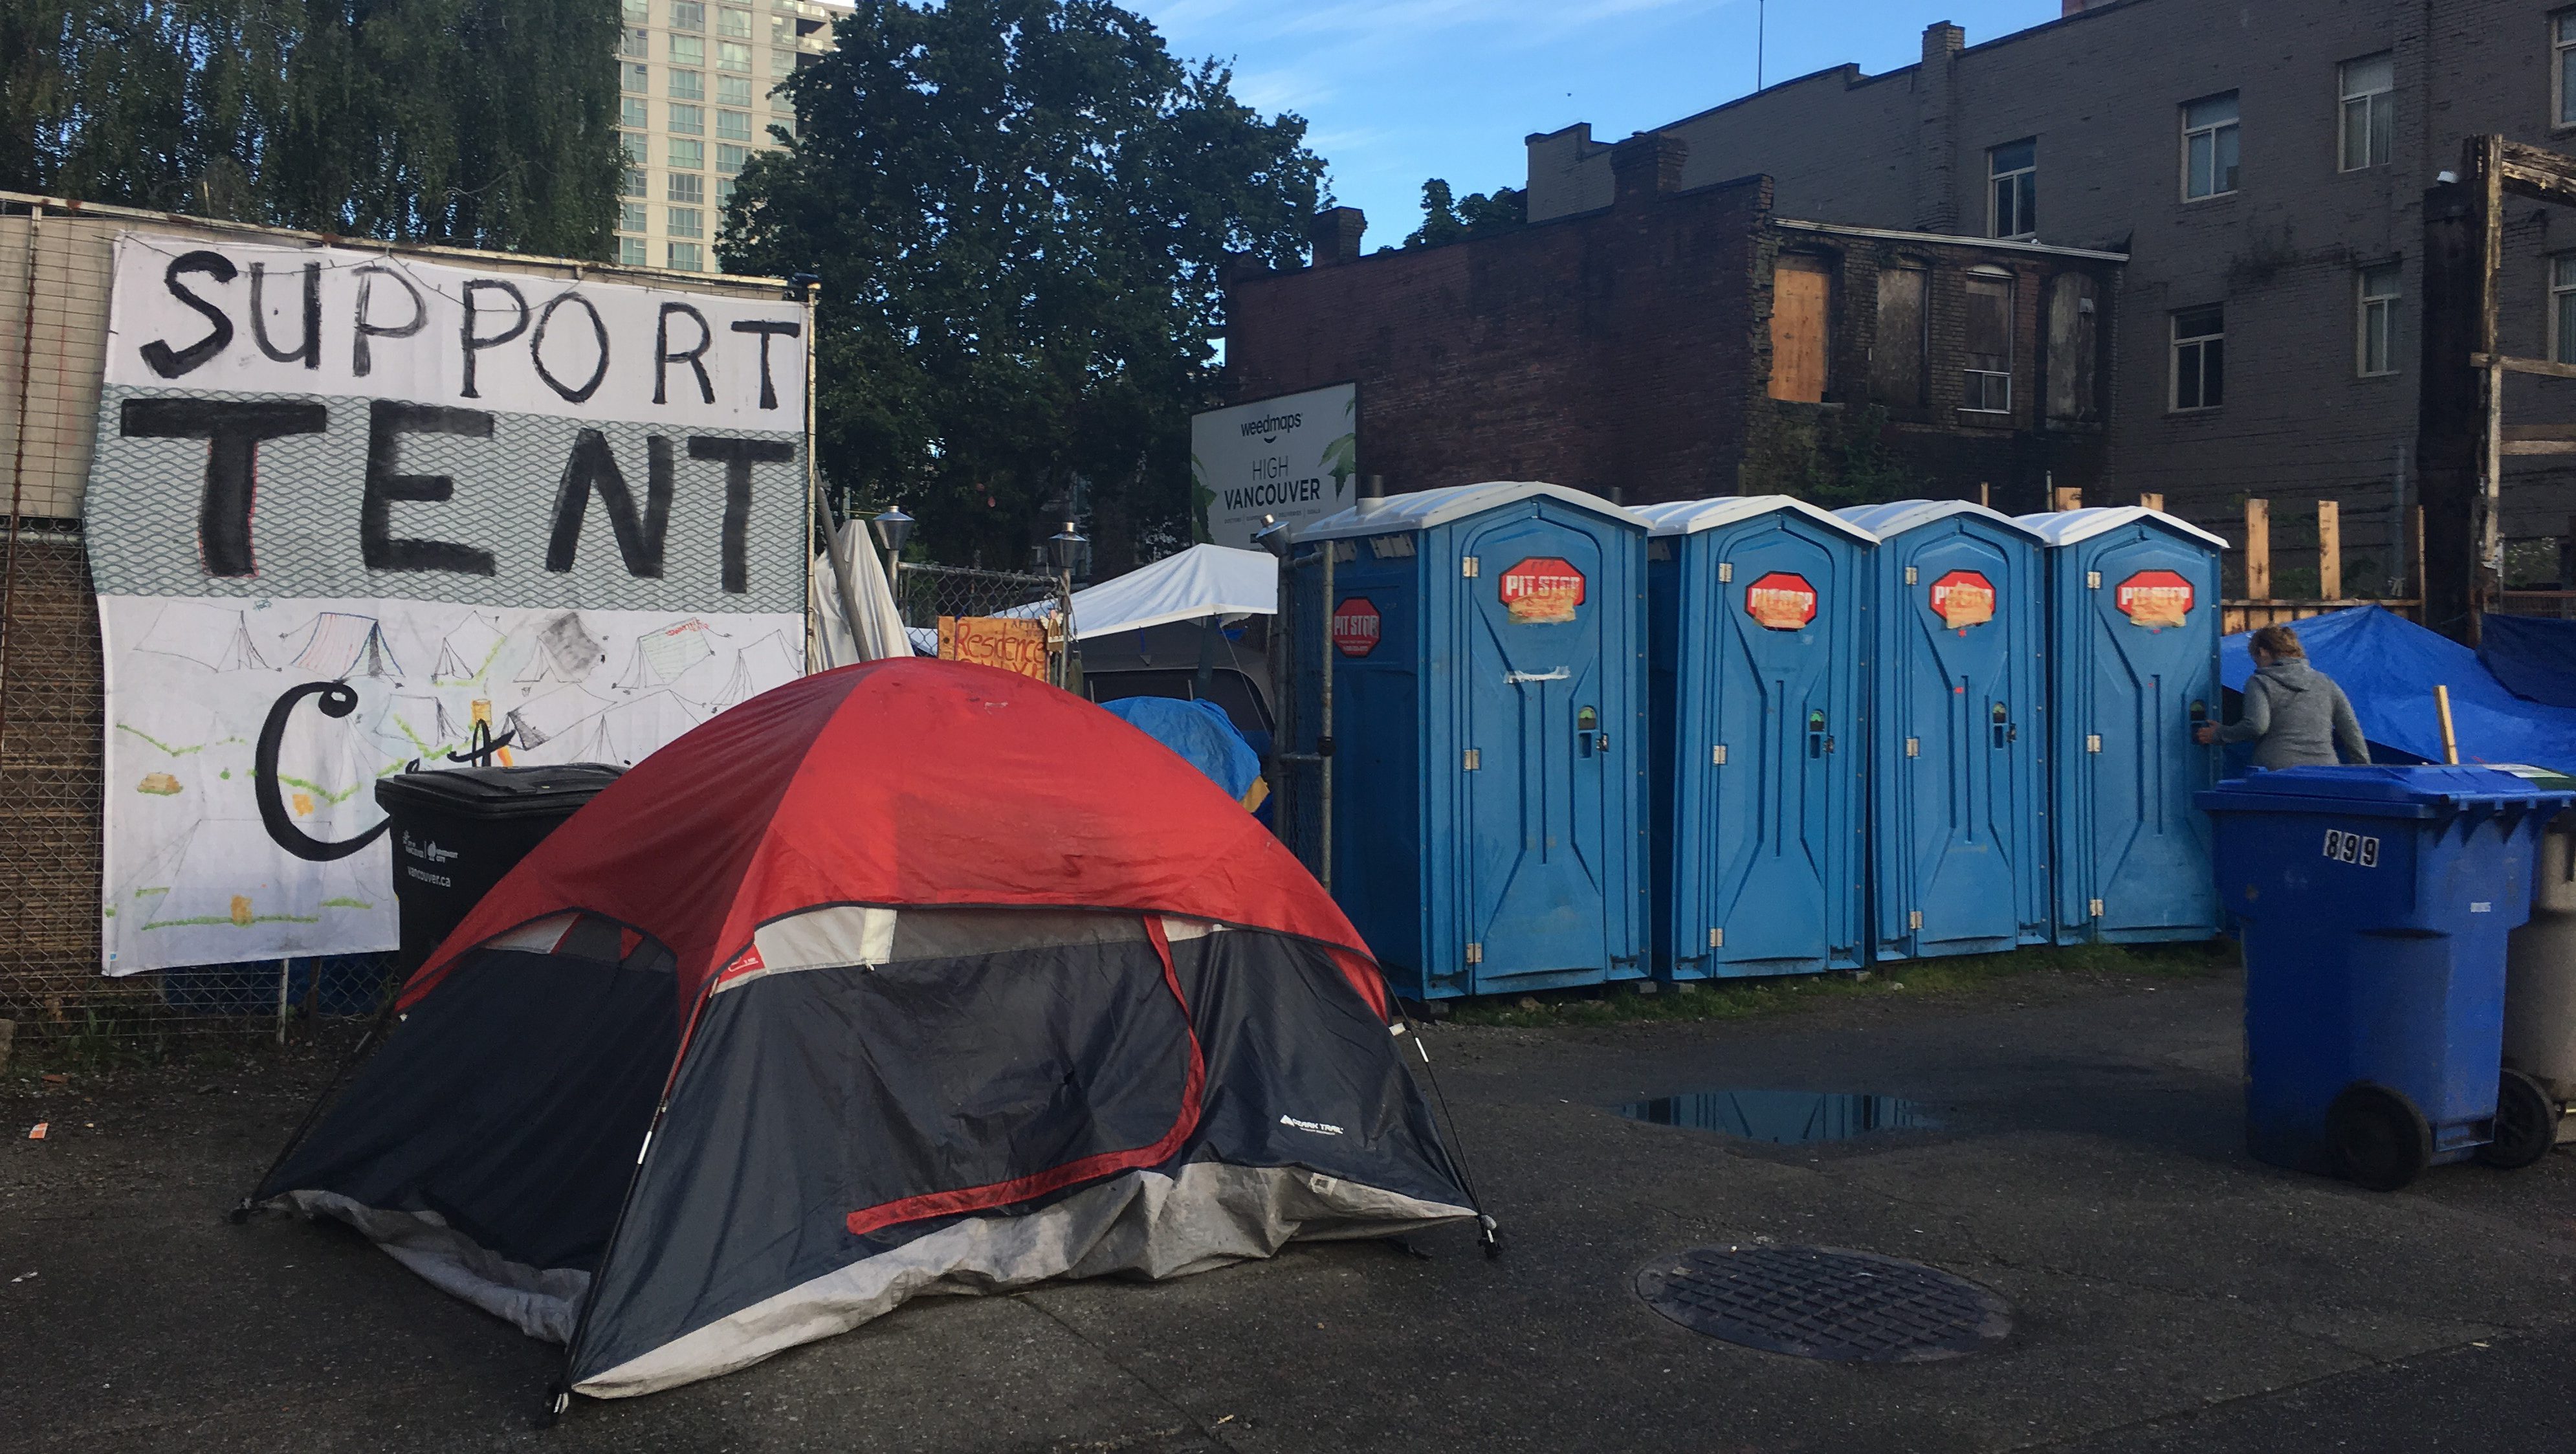 Campers march to new site as tent city eviction looms CityNews Vancouver